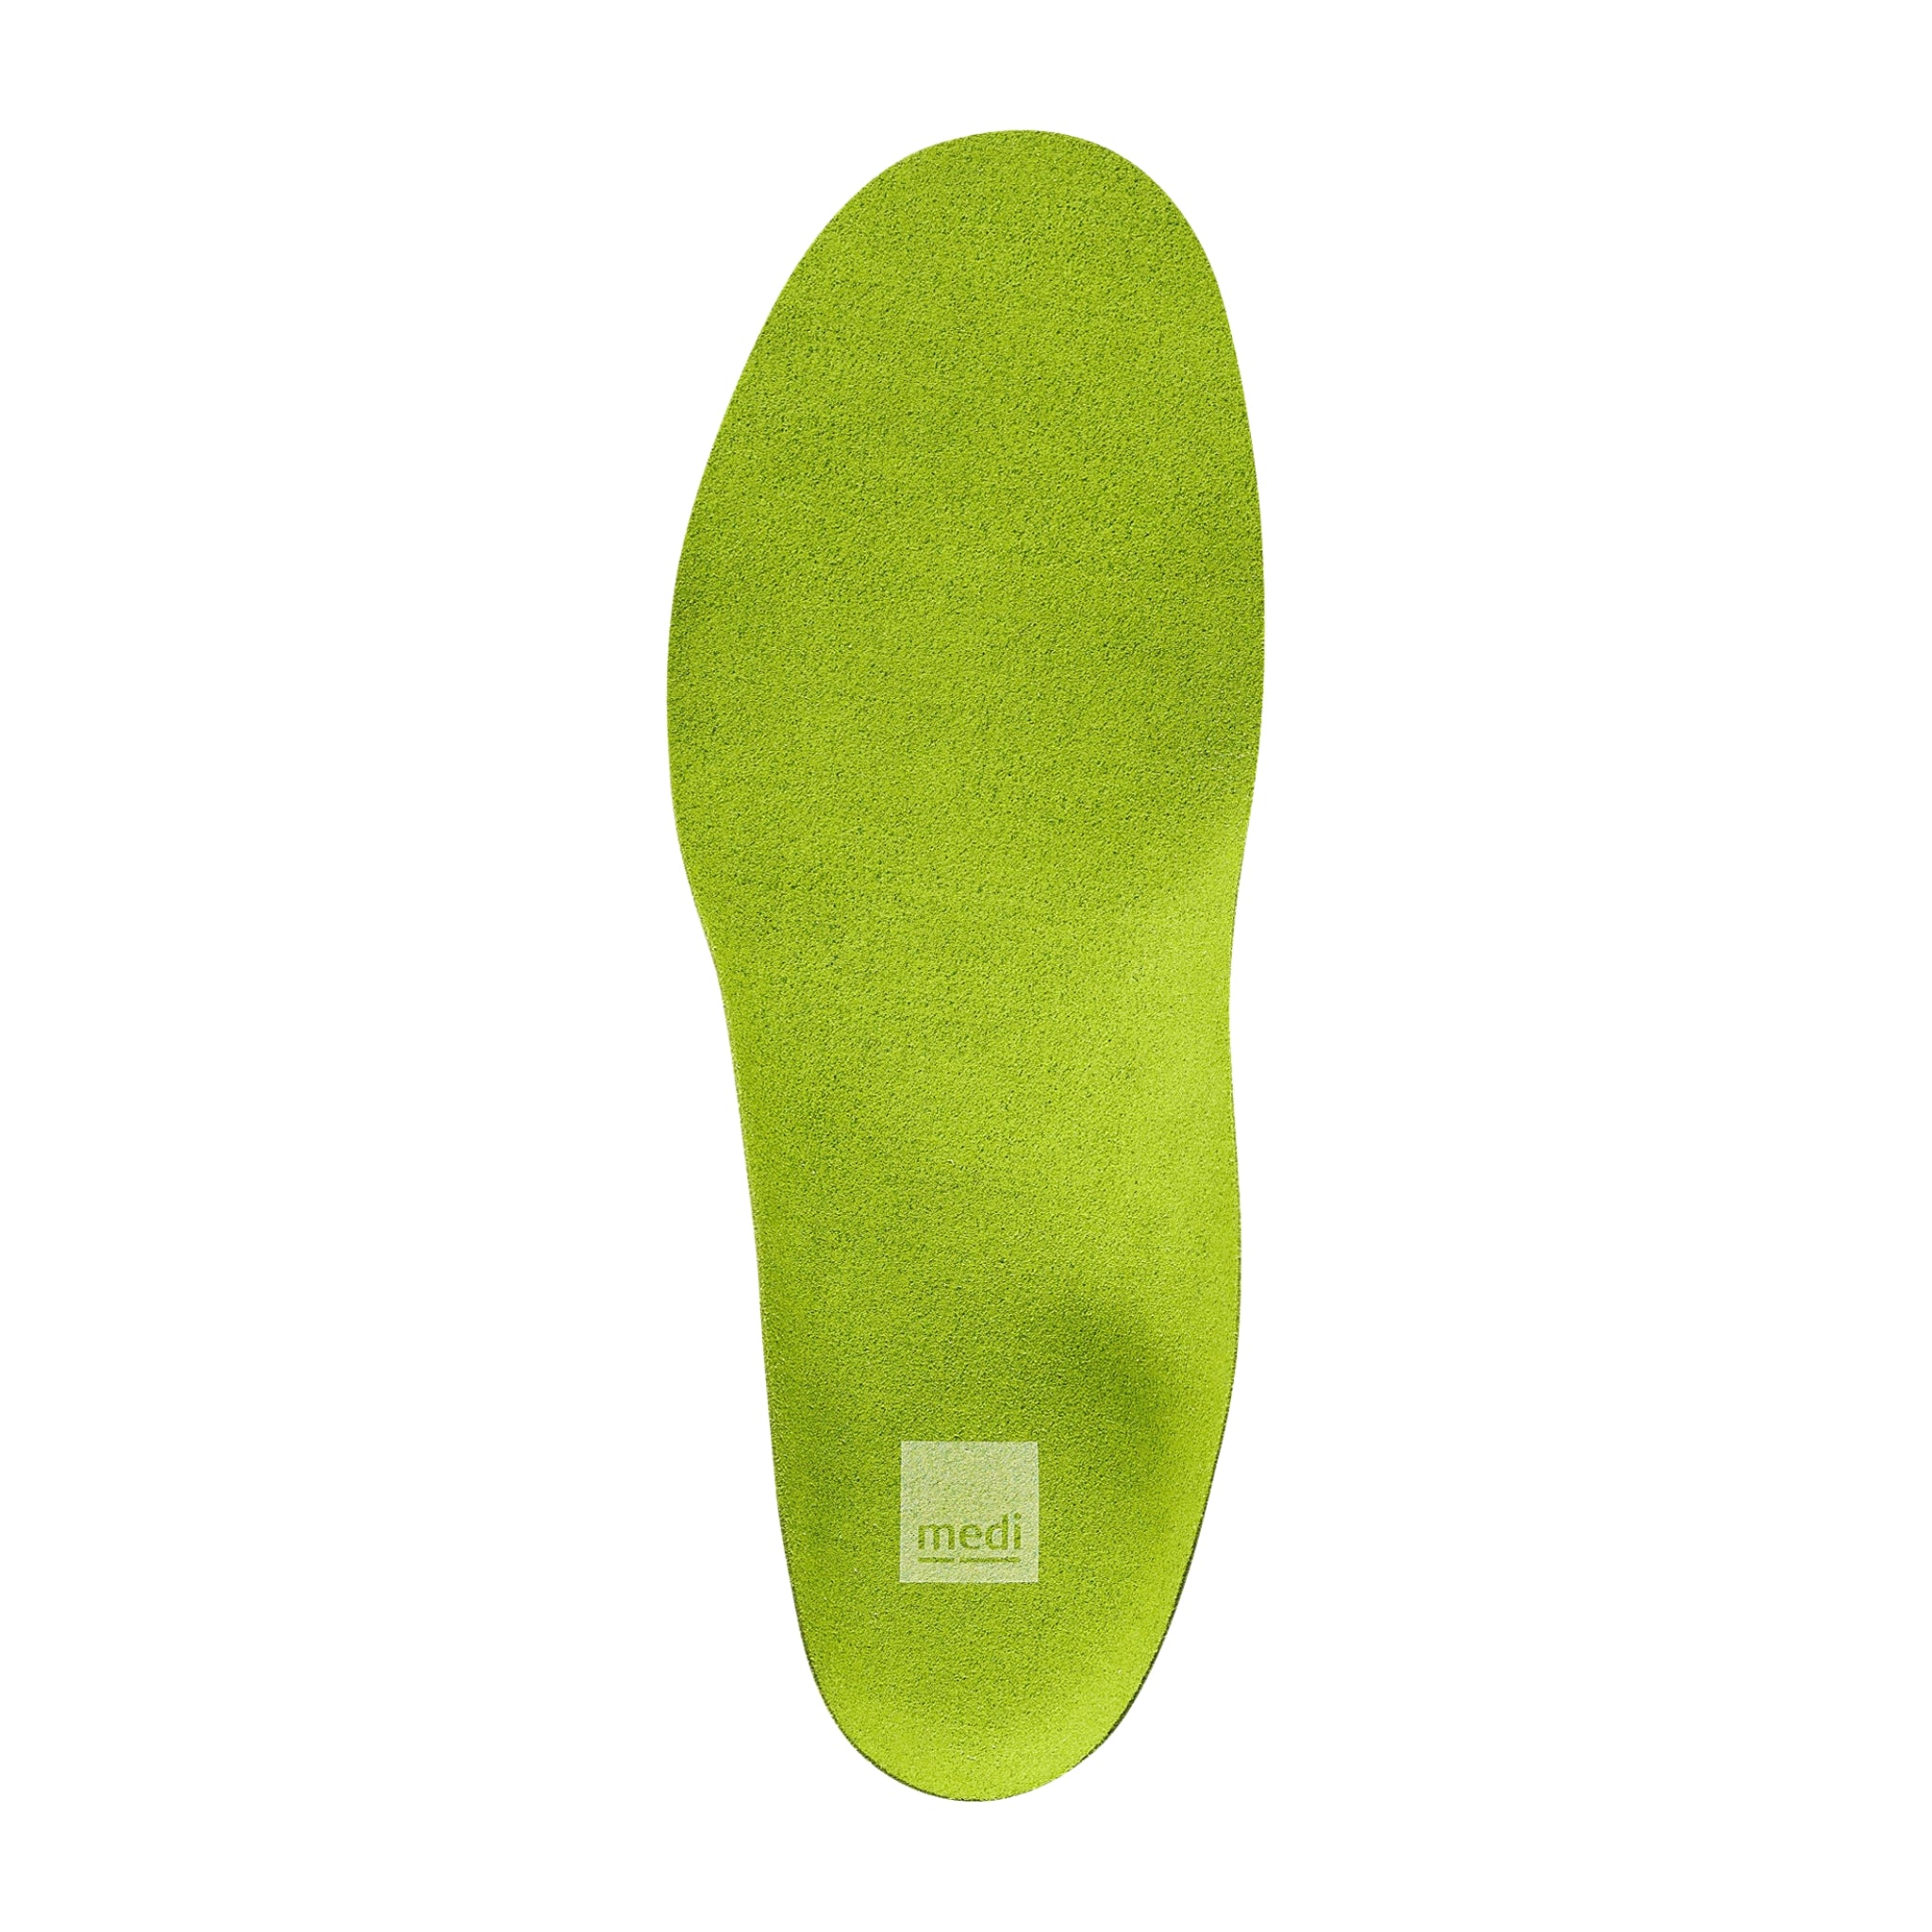 Foot Support Junior | Medical Shoe Insoles for Children